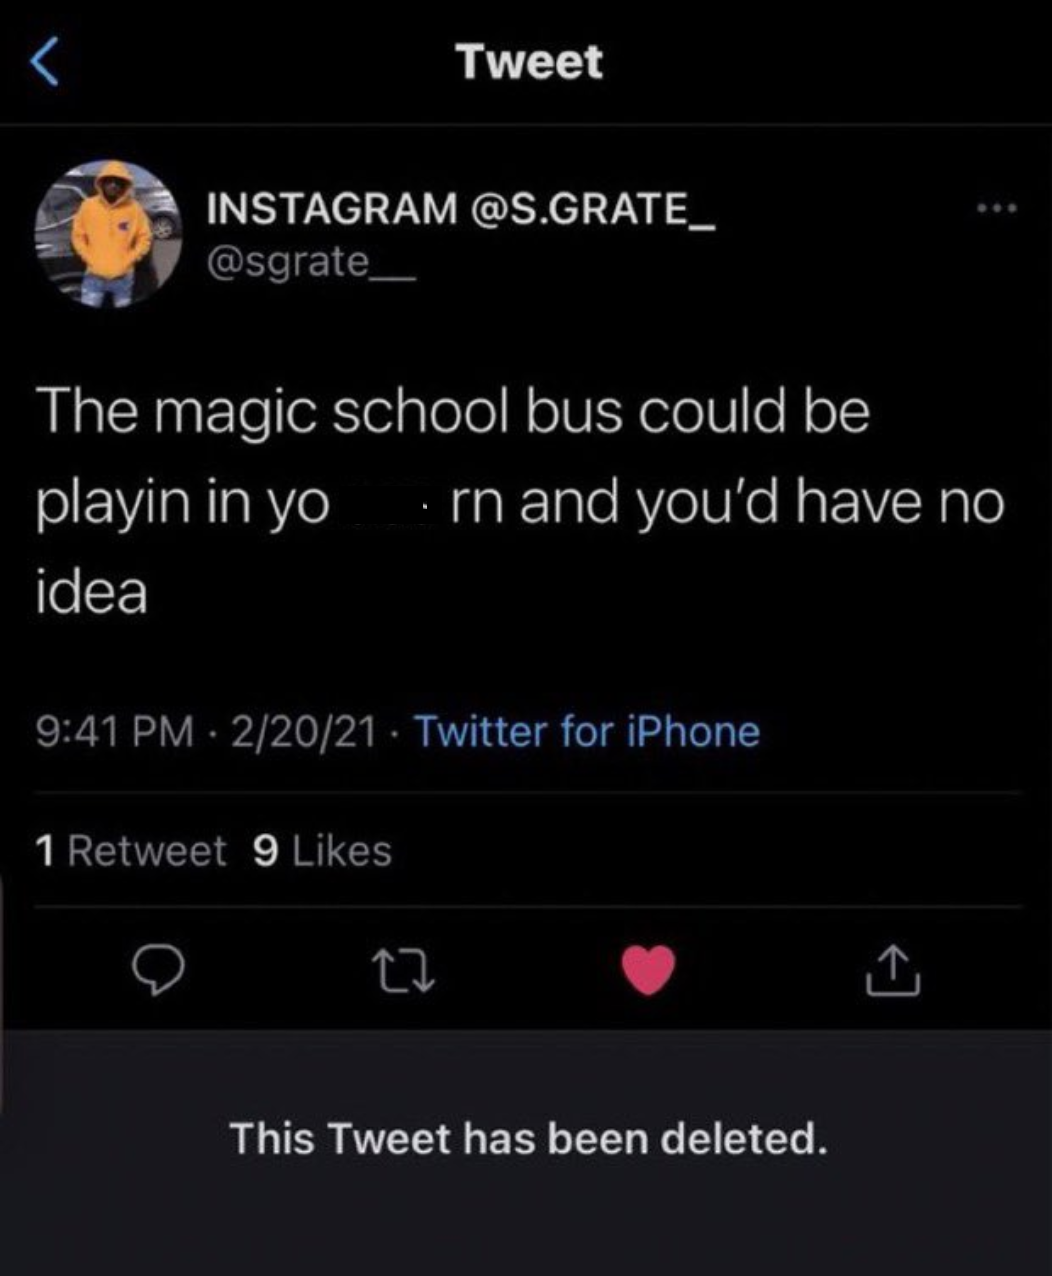 screenshot - Tweet Instagram .GRATE_ The magic school bus could be playin in yo rn and you'd have no idea 22021 Twitter for iPhone 1 Retweet 9 27 This Tweet has been deleted.